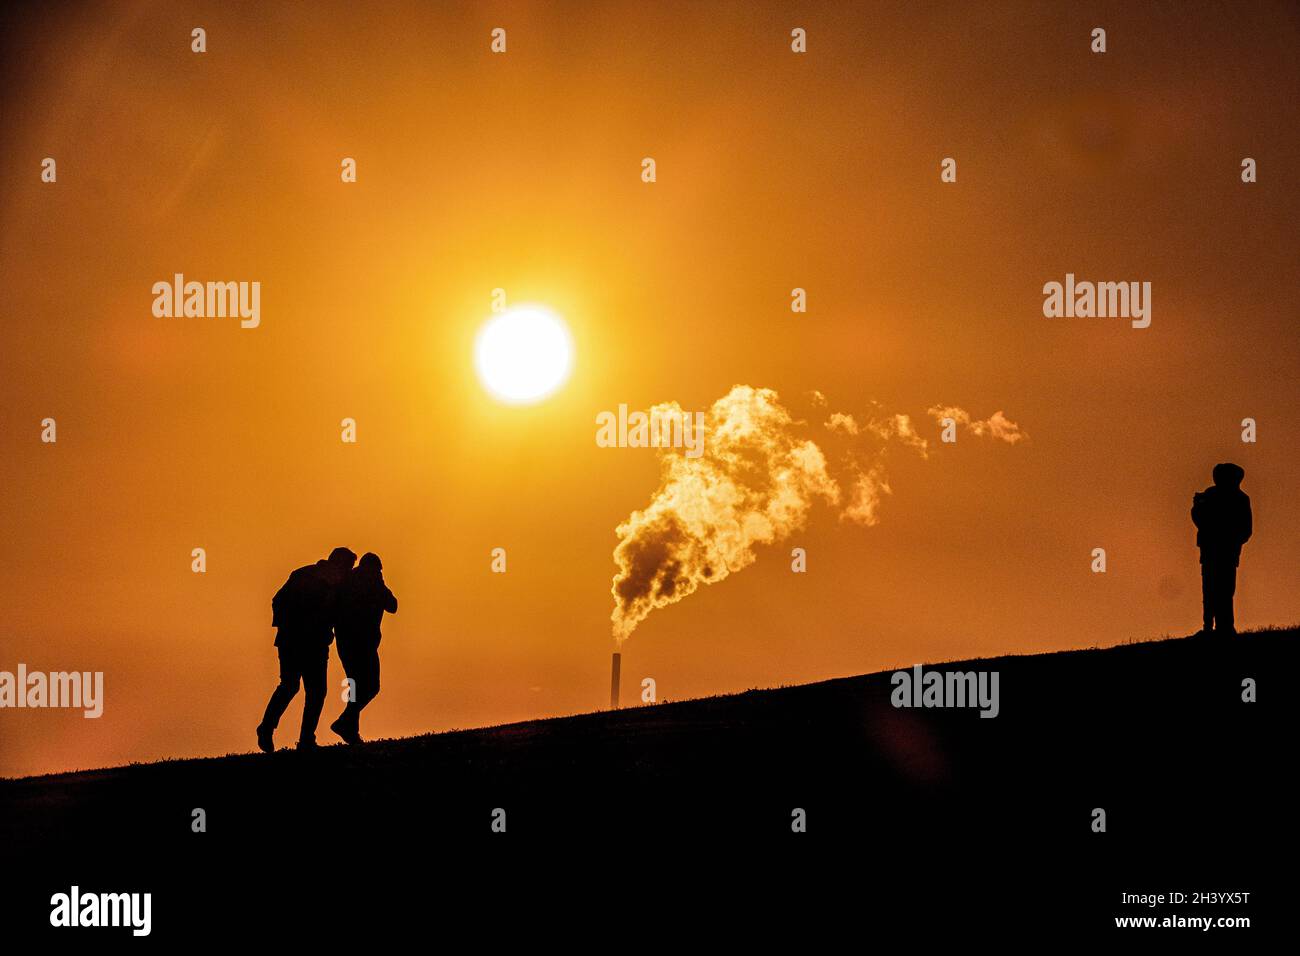 Global warming: A warming sun and steam rises as silhouettes of people stand on a hill in Melbourne Australia . Stock Photo